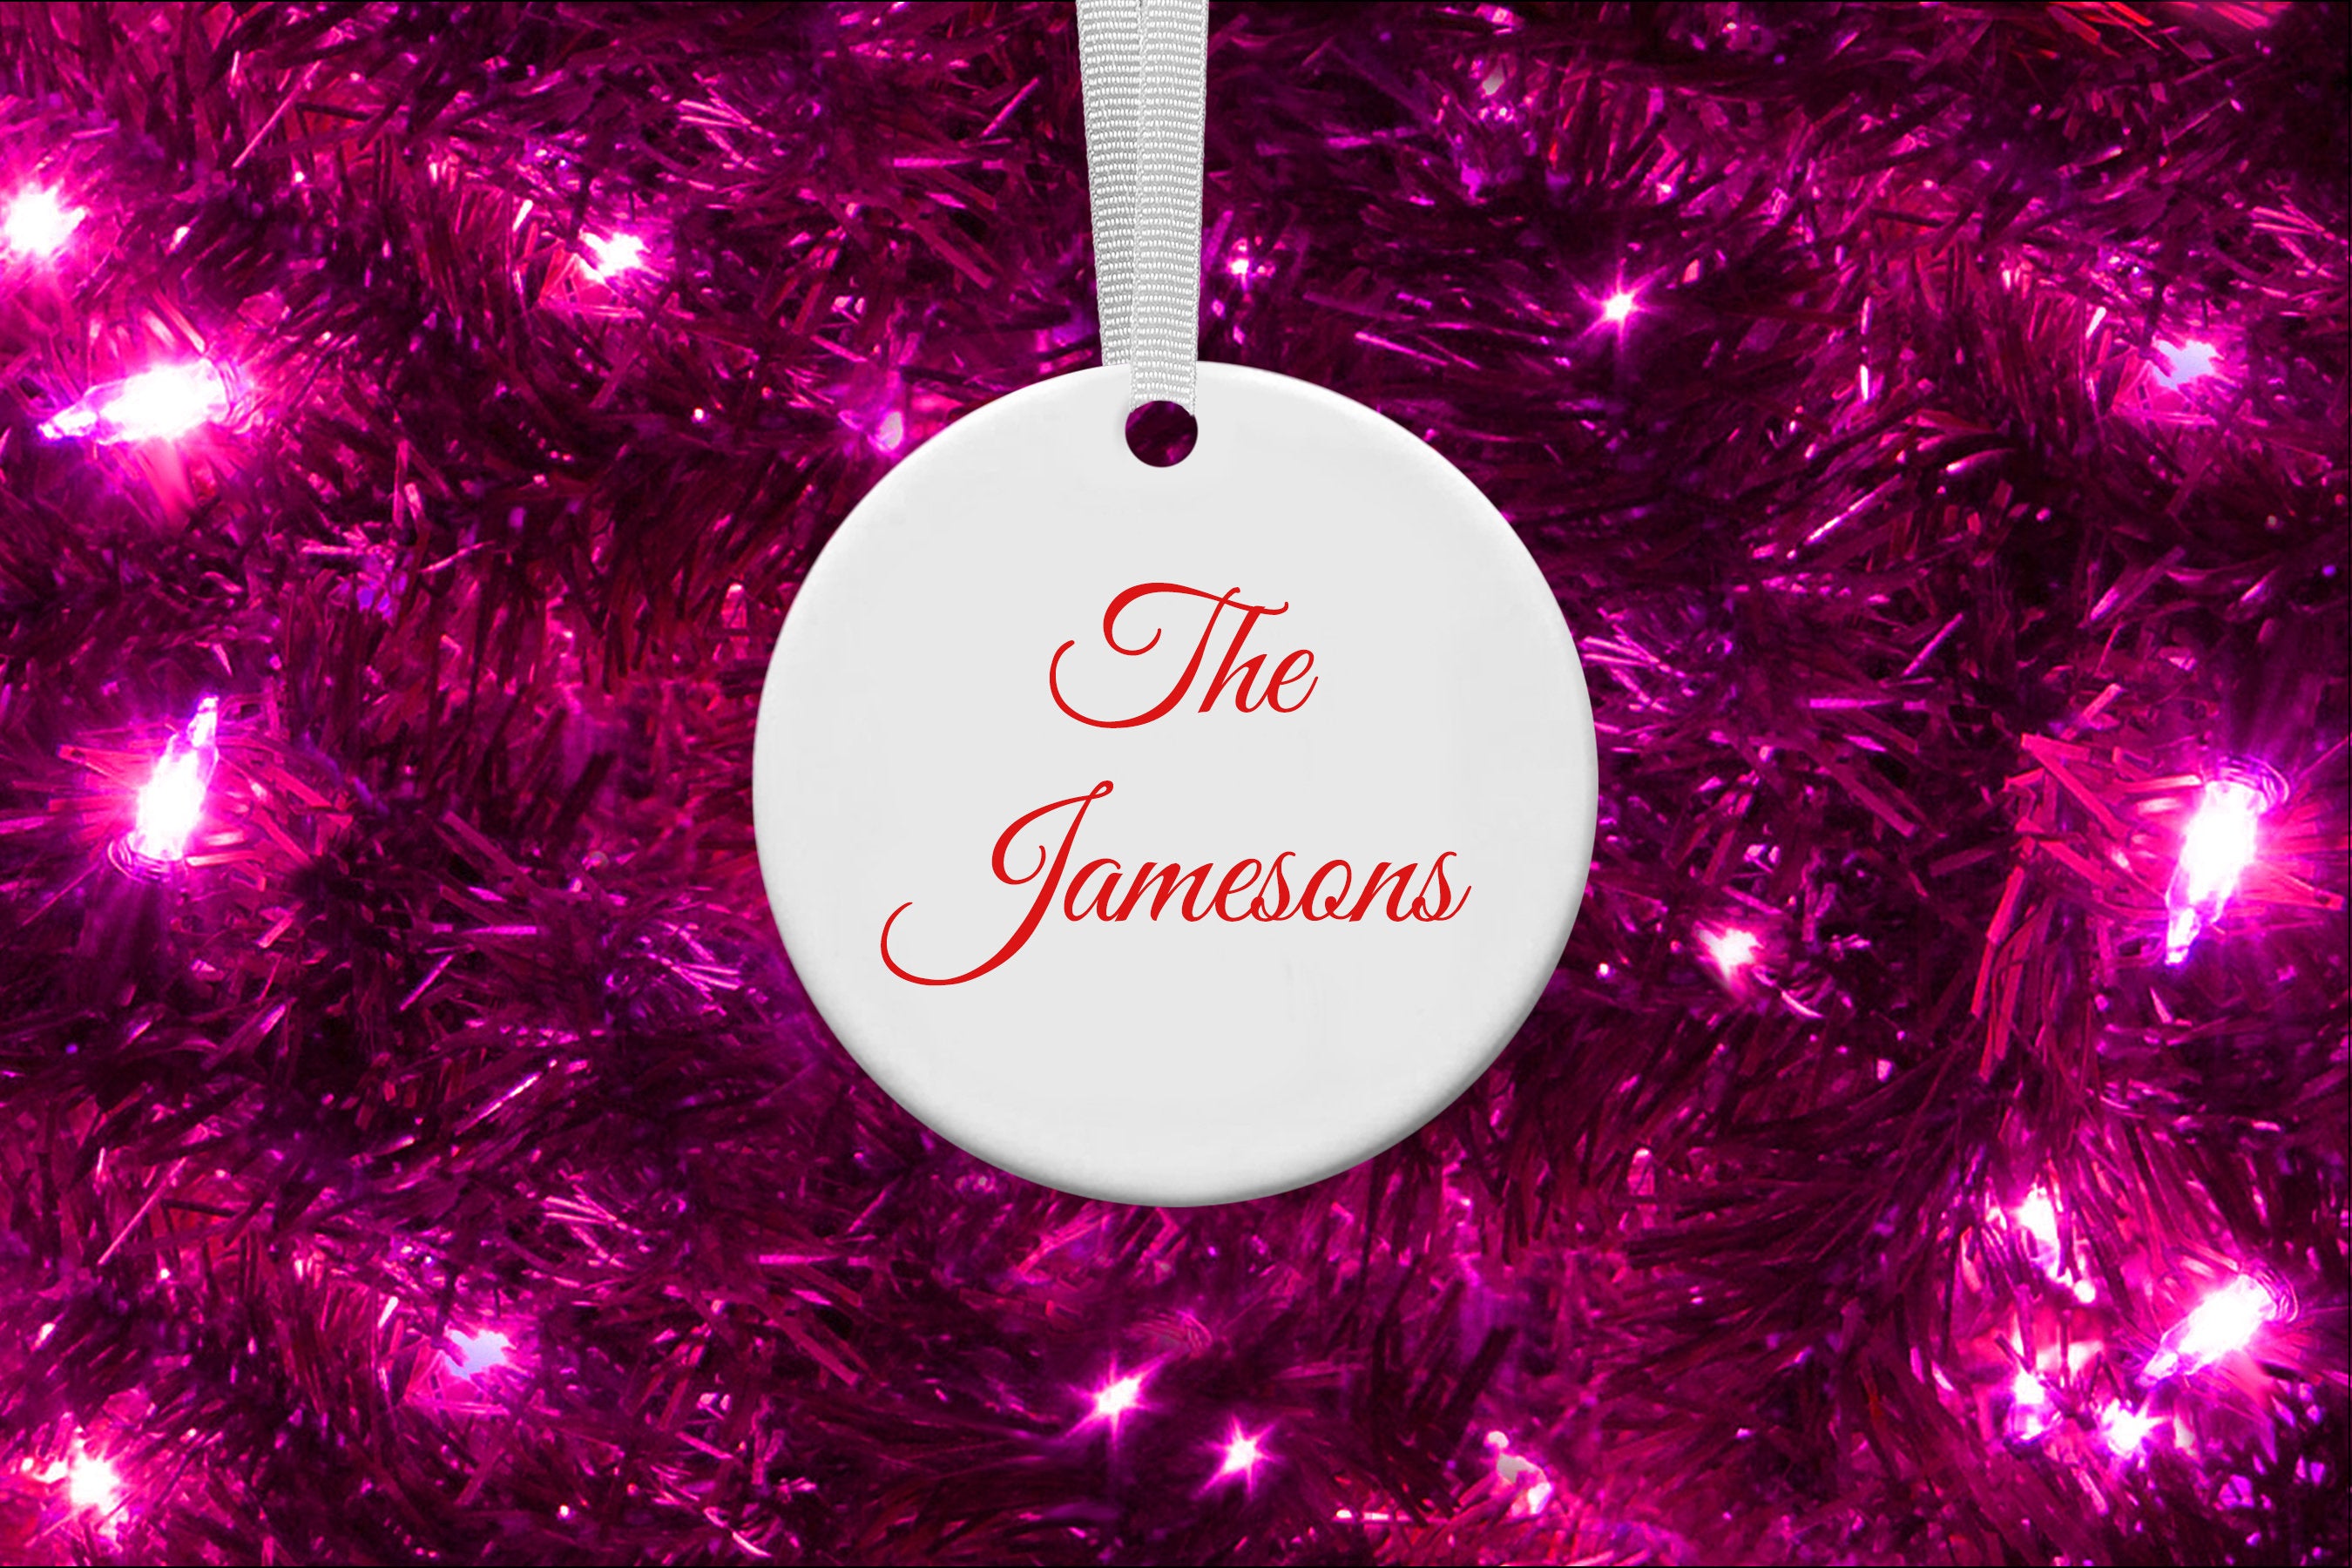 Personalized Round Ceramic Ornament for Christmas Holiday - 3 inches